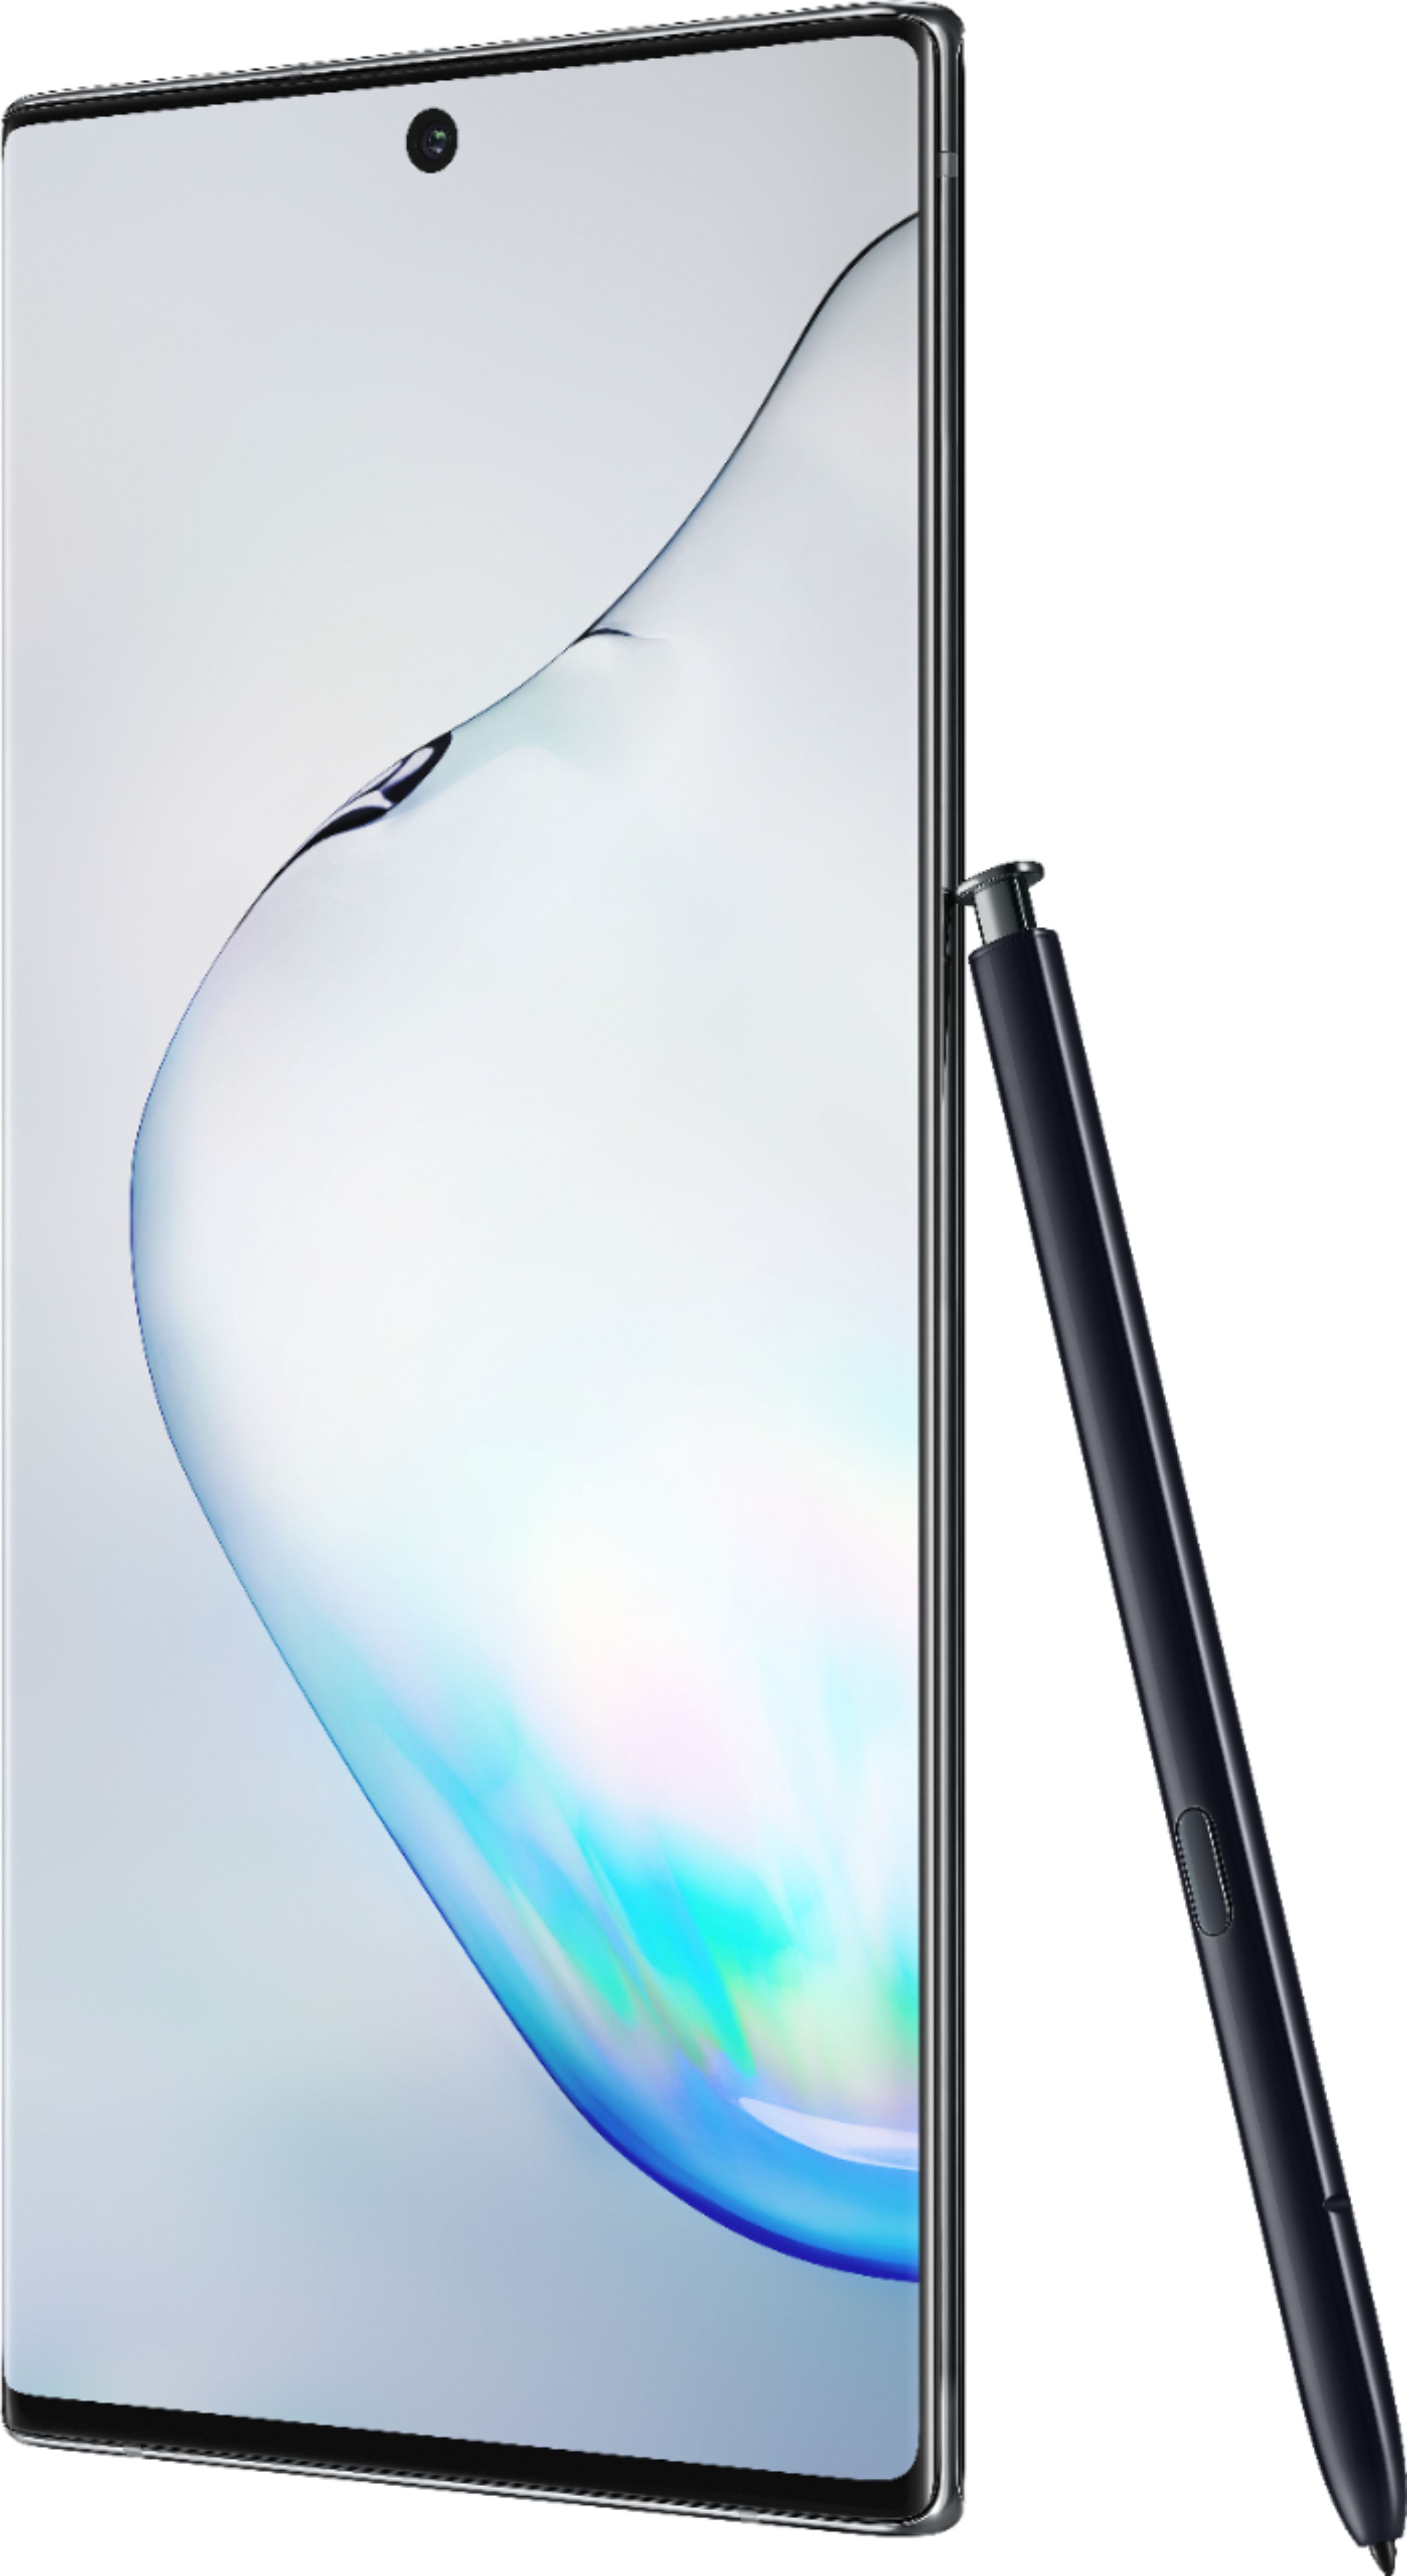 Galaxy Note 10 Plus 5G, like all early 5G phones, isn't a good deal just  yet - CNET